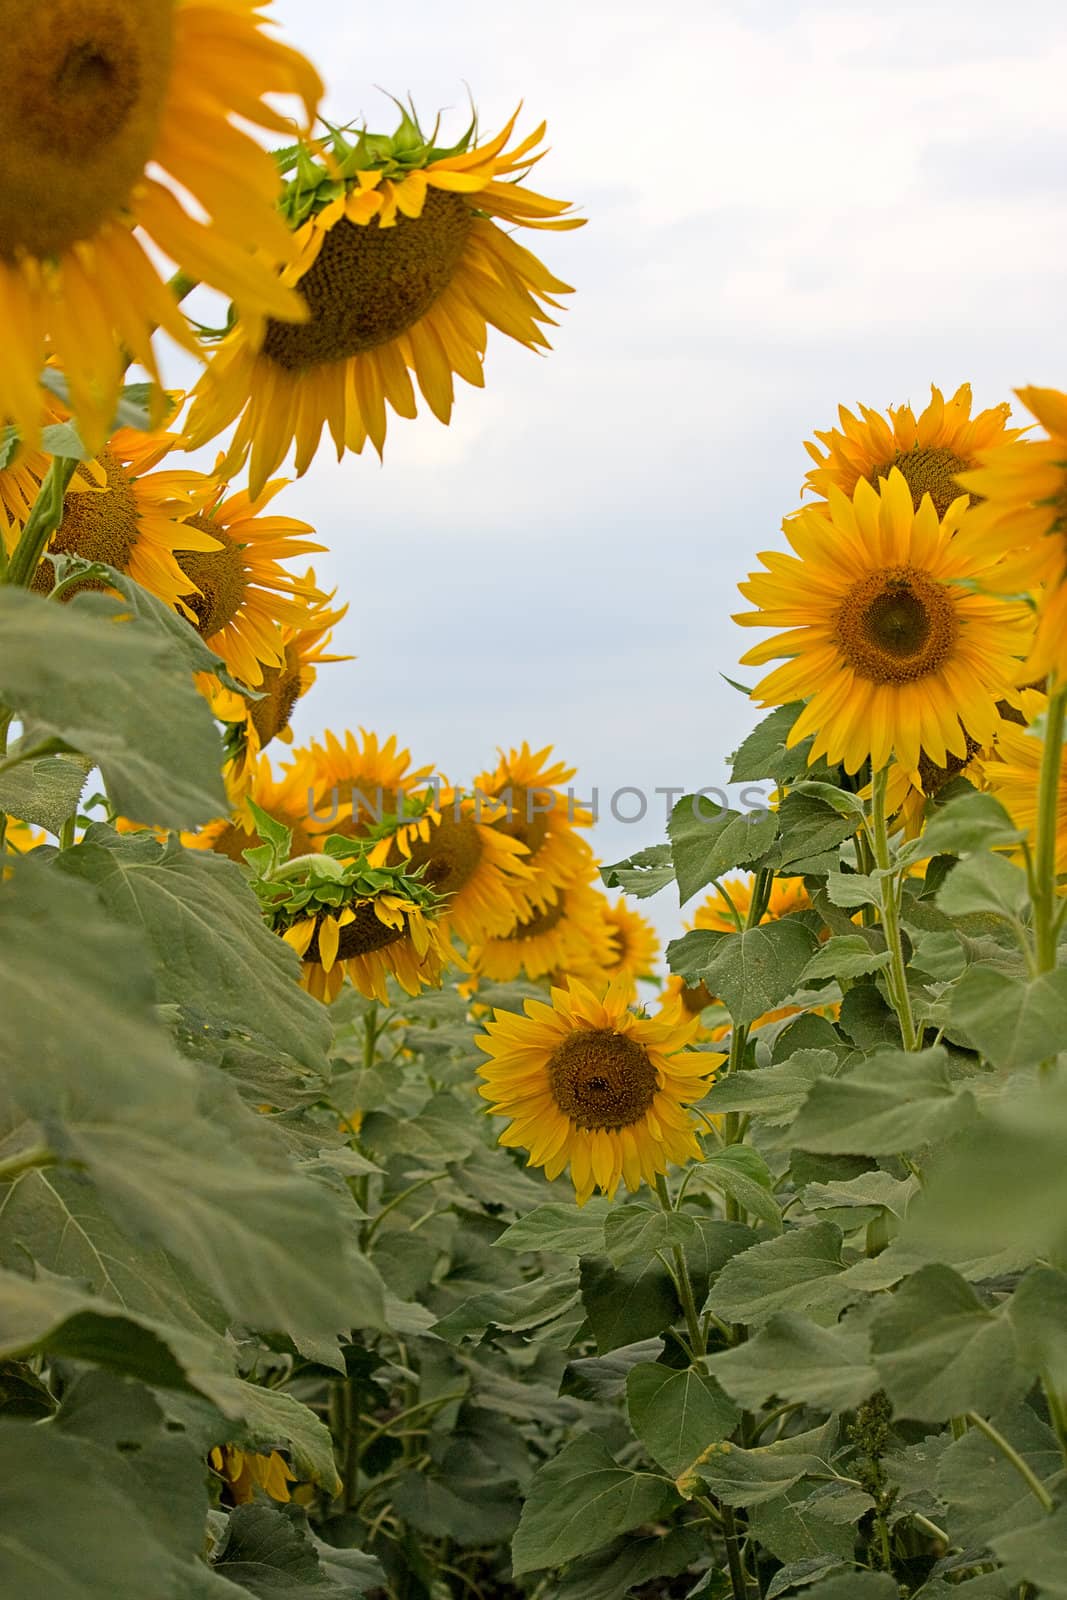 Large field of blooming sunflowers. An image with shallow depth of field